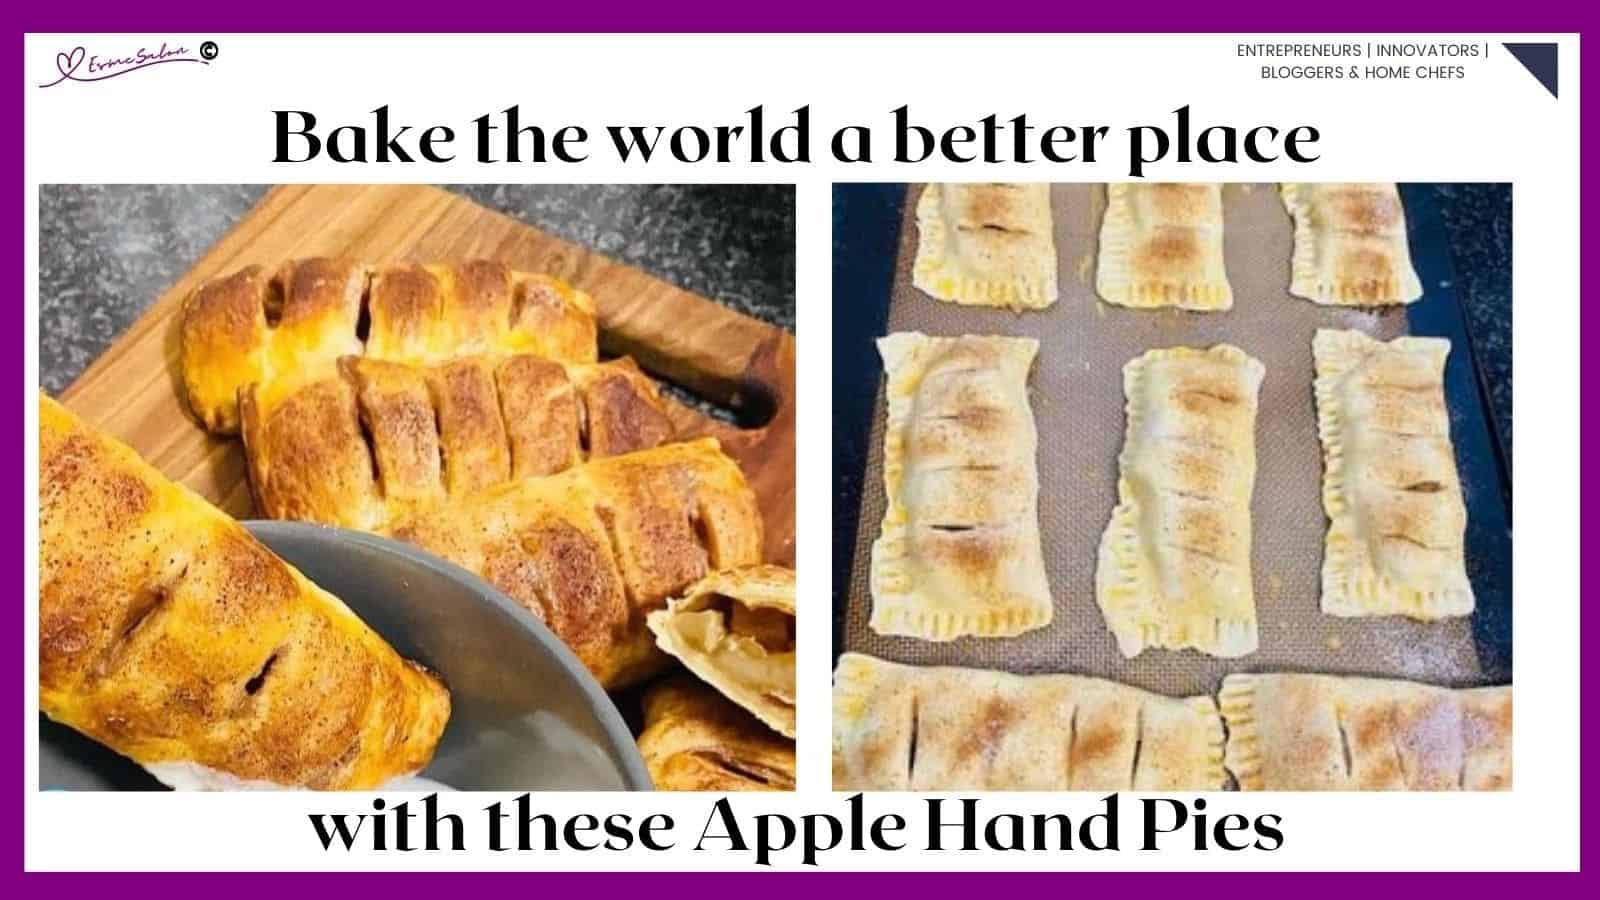 an image of Apple Hand Pies baked and some still raw to be baked